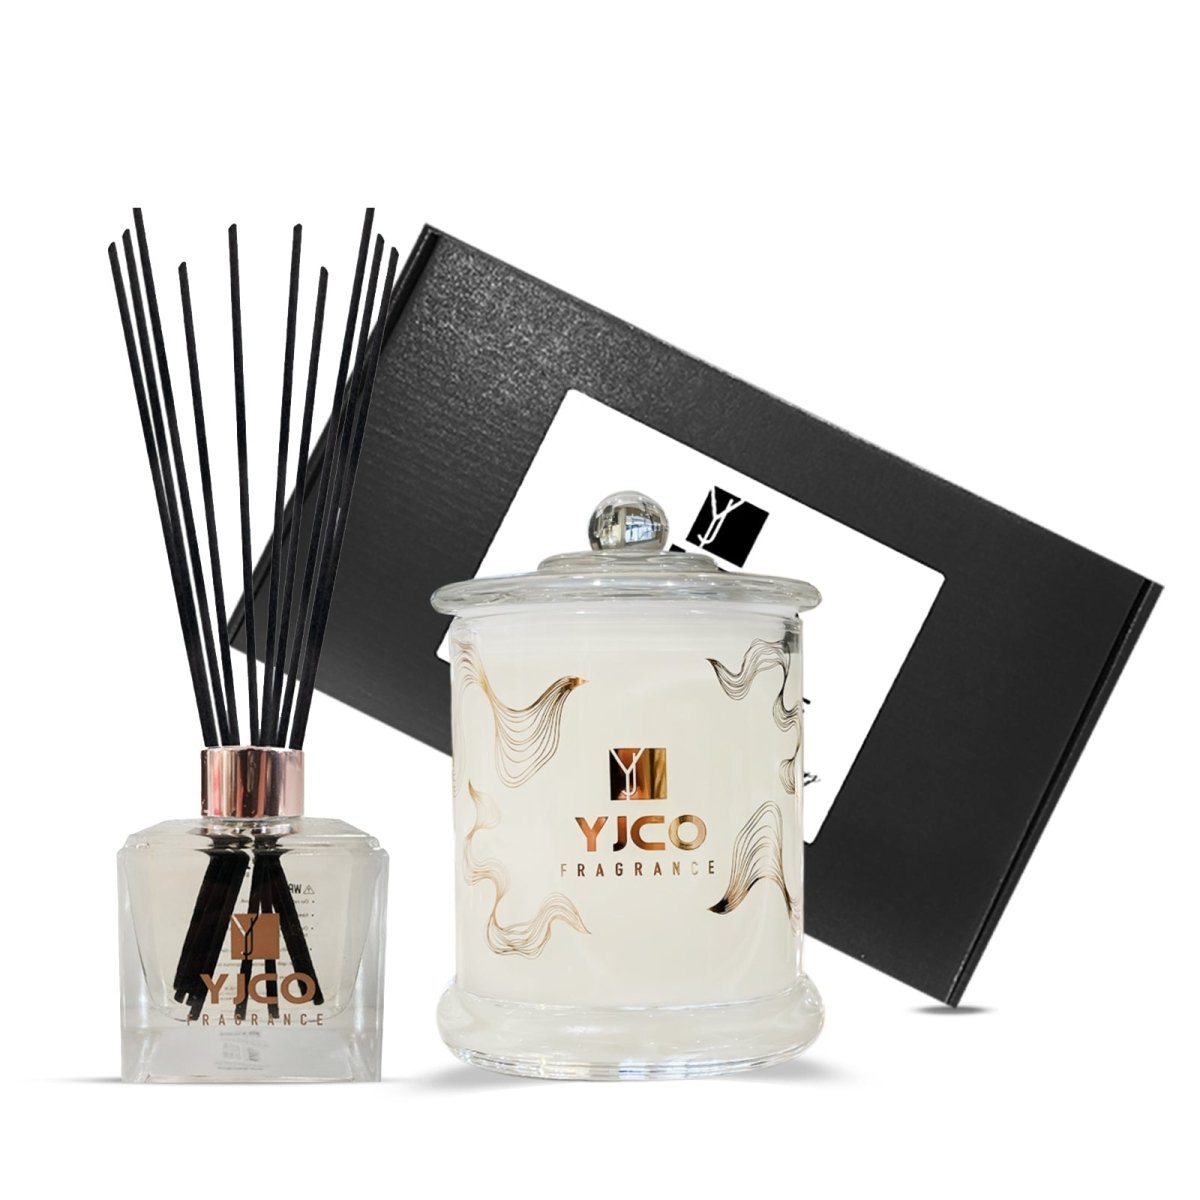 Yjco Fragrance Luxe Gift Box Large Candle With Reeds Diffuser - YJCO FRAGRANCE